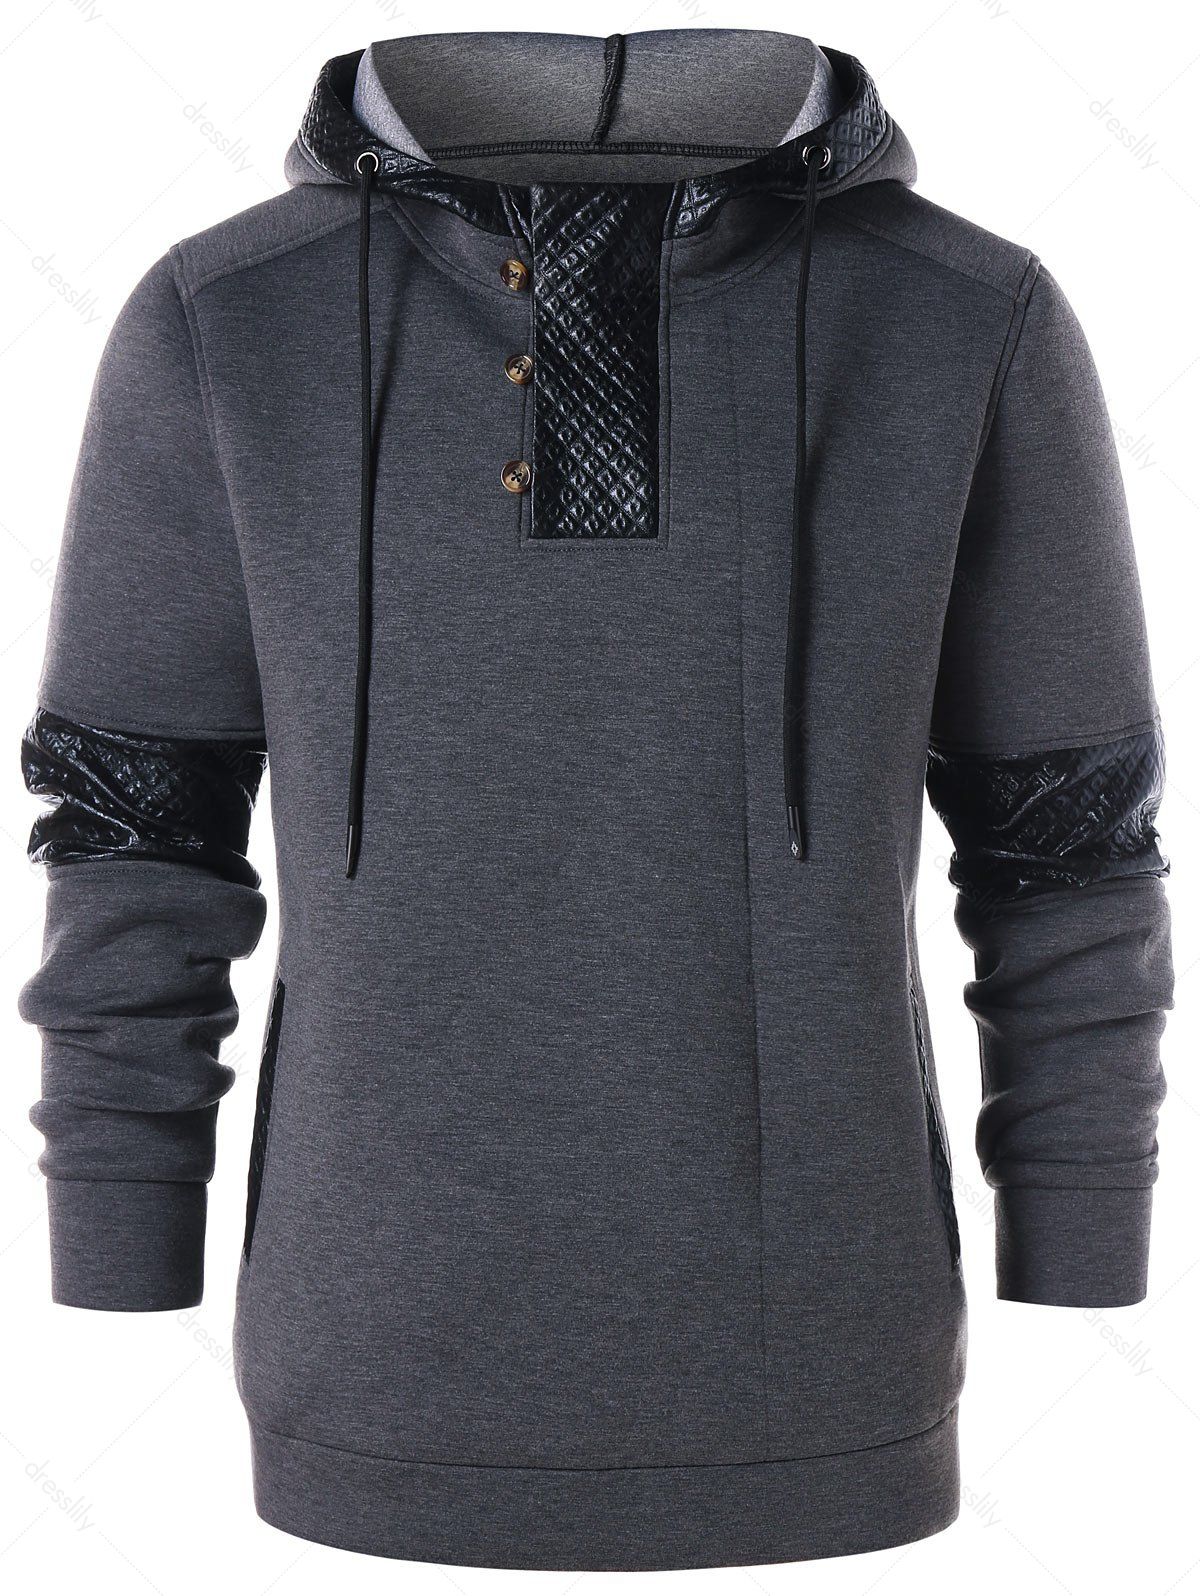 PU Leather Panel Button Embellished  Hoodie - GRAY 2XL